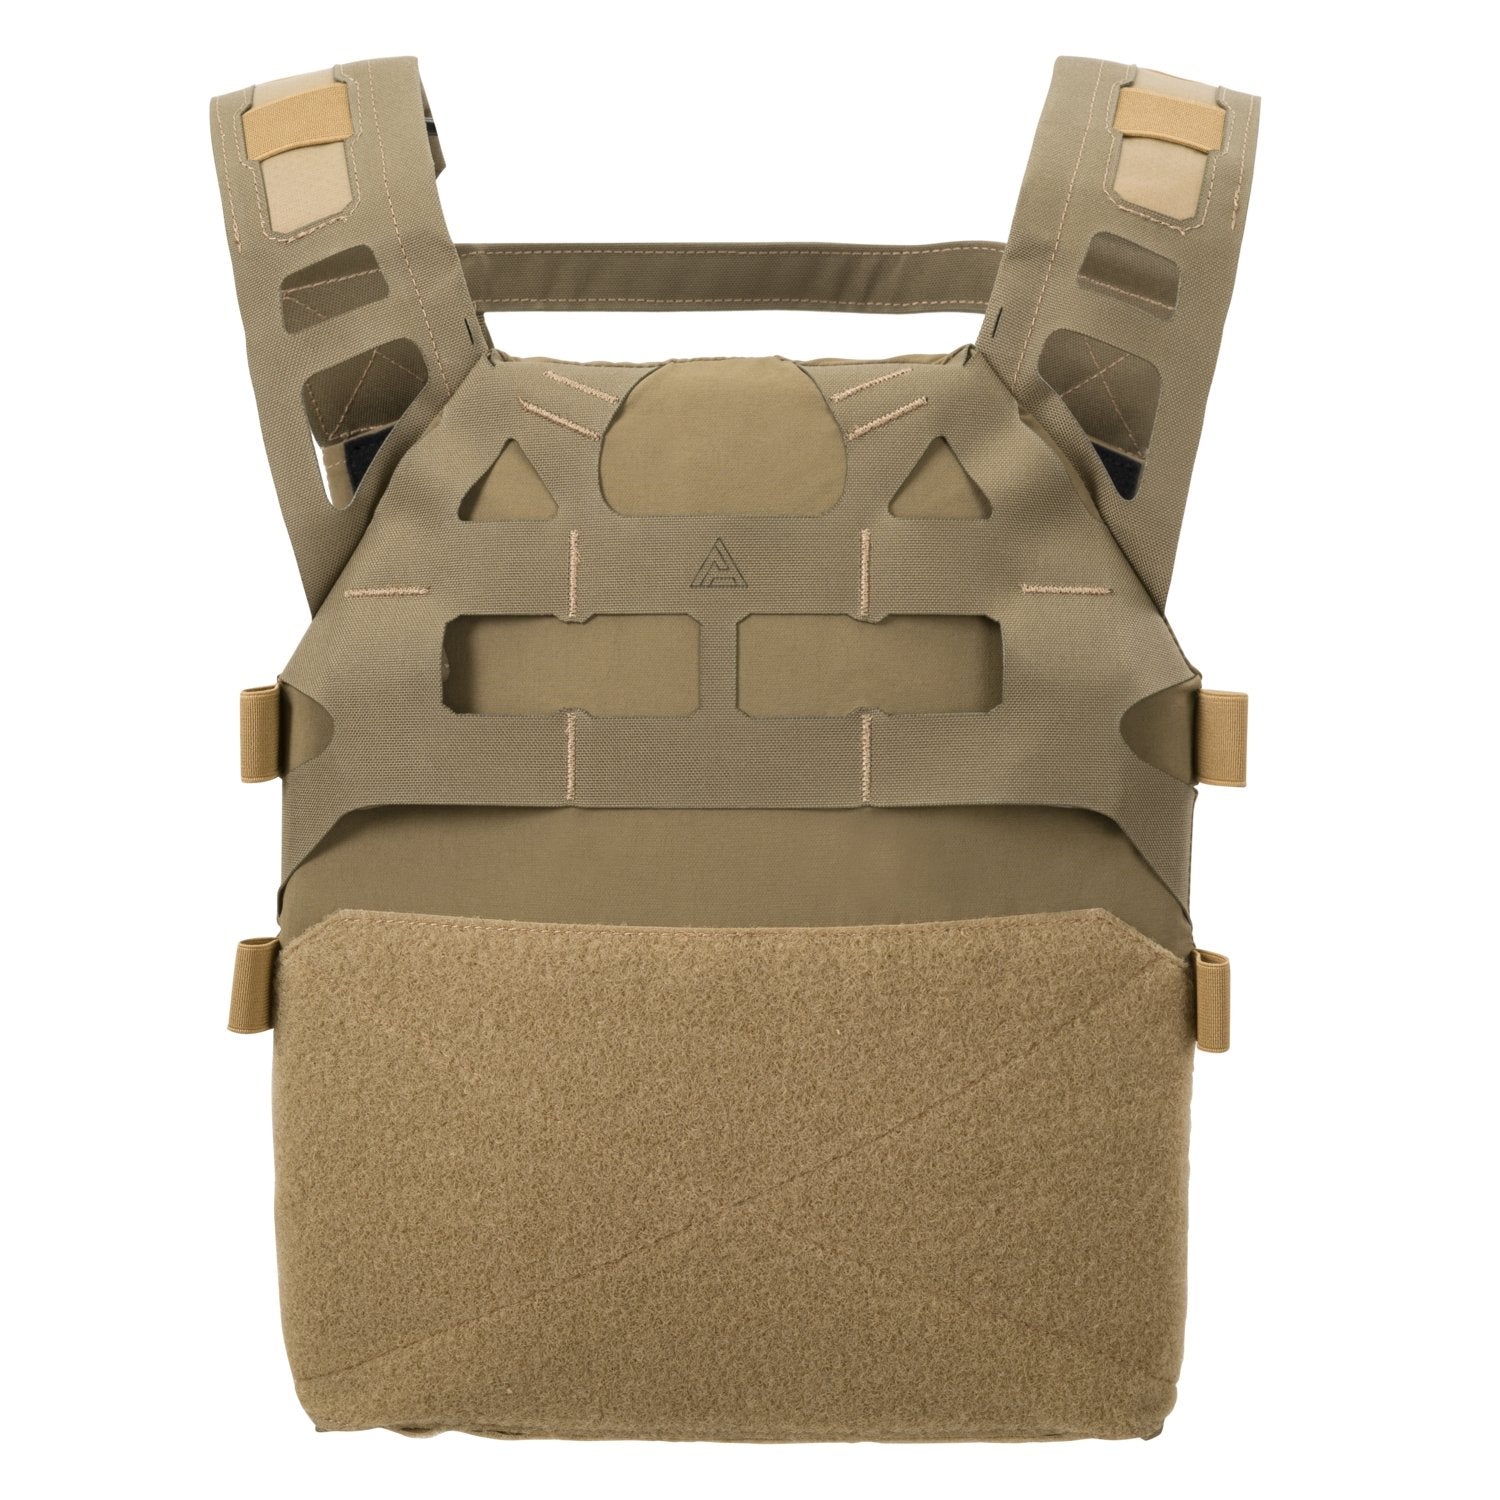 Direct Action BEARCAT Ultralight Plate Carrier® Coyote Brown